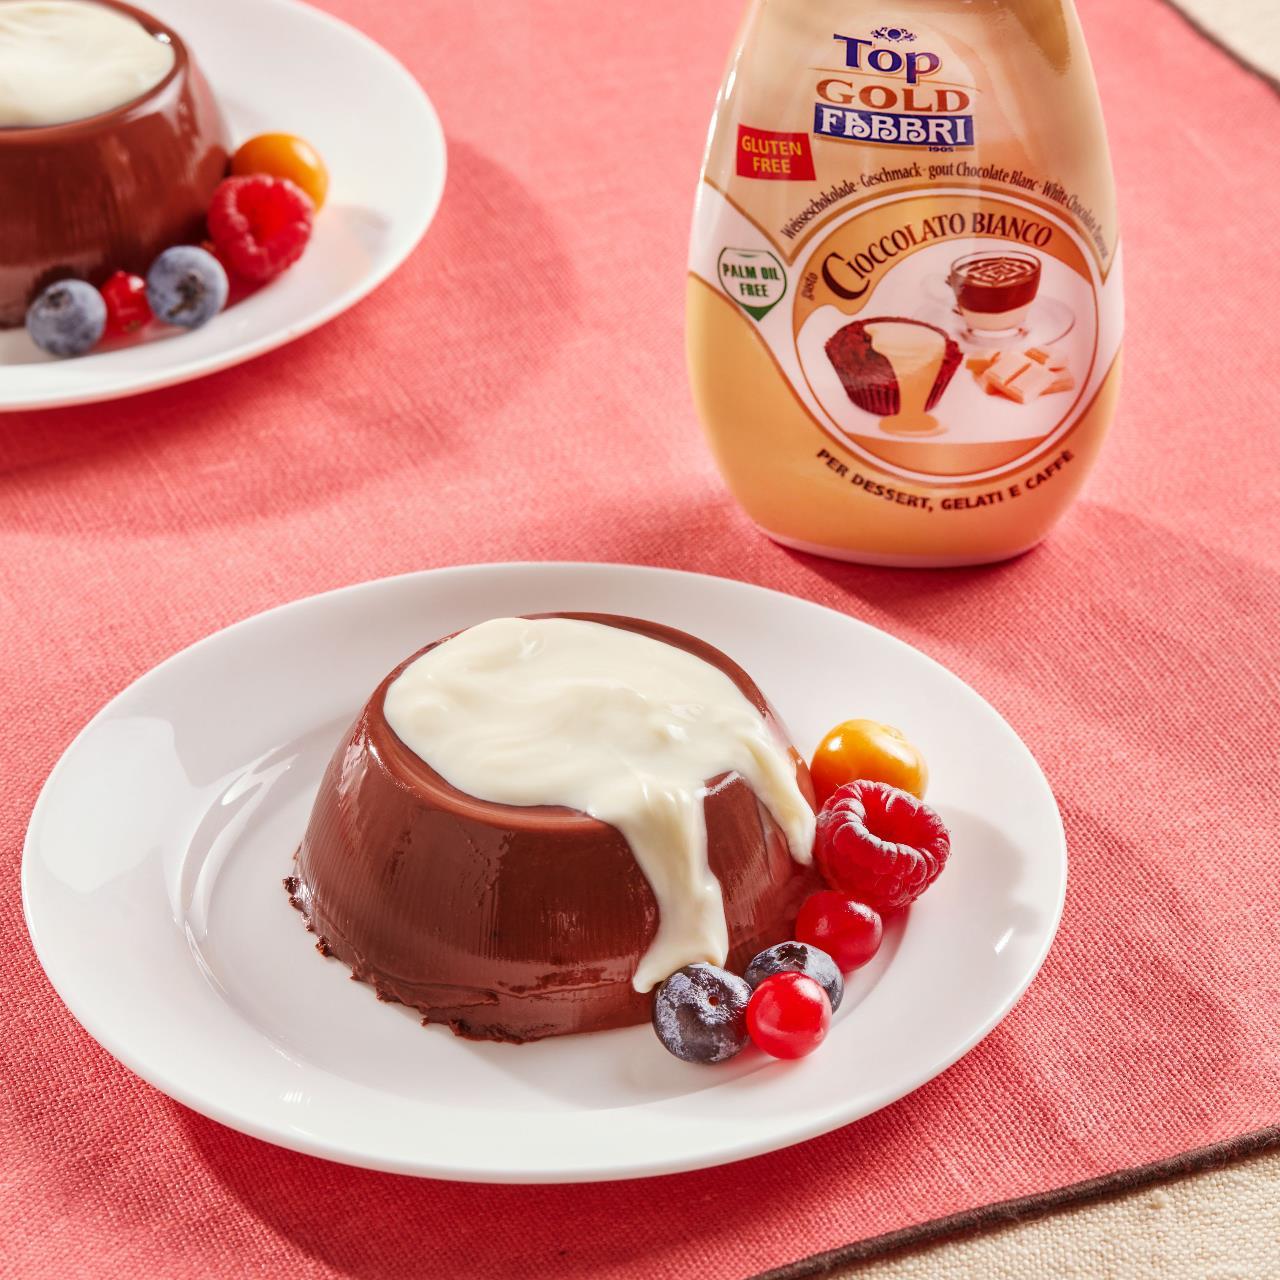 Chocolate pudding with Top White Chocolate